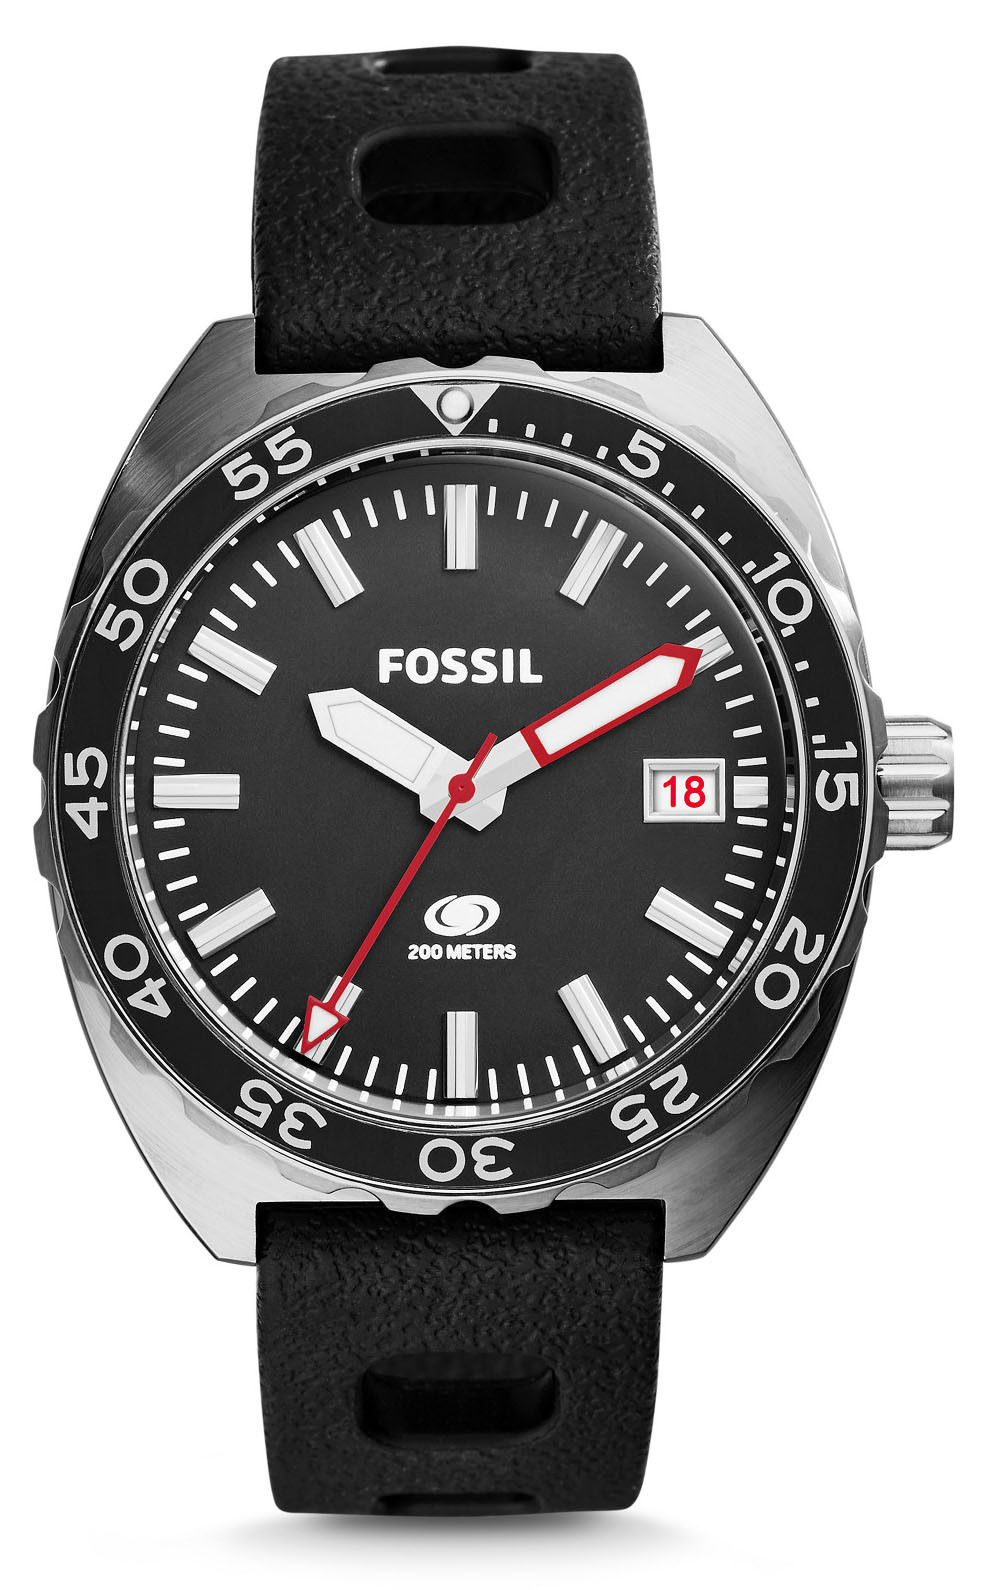 Fossil FS5053 Men's Breaker Three Hand Date Silicone Band Black Dial Watch